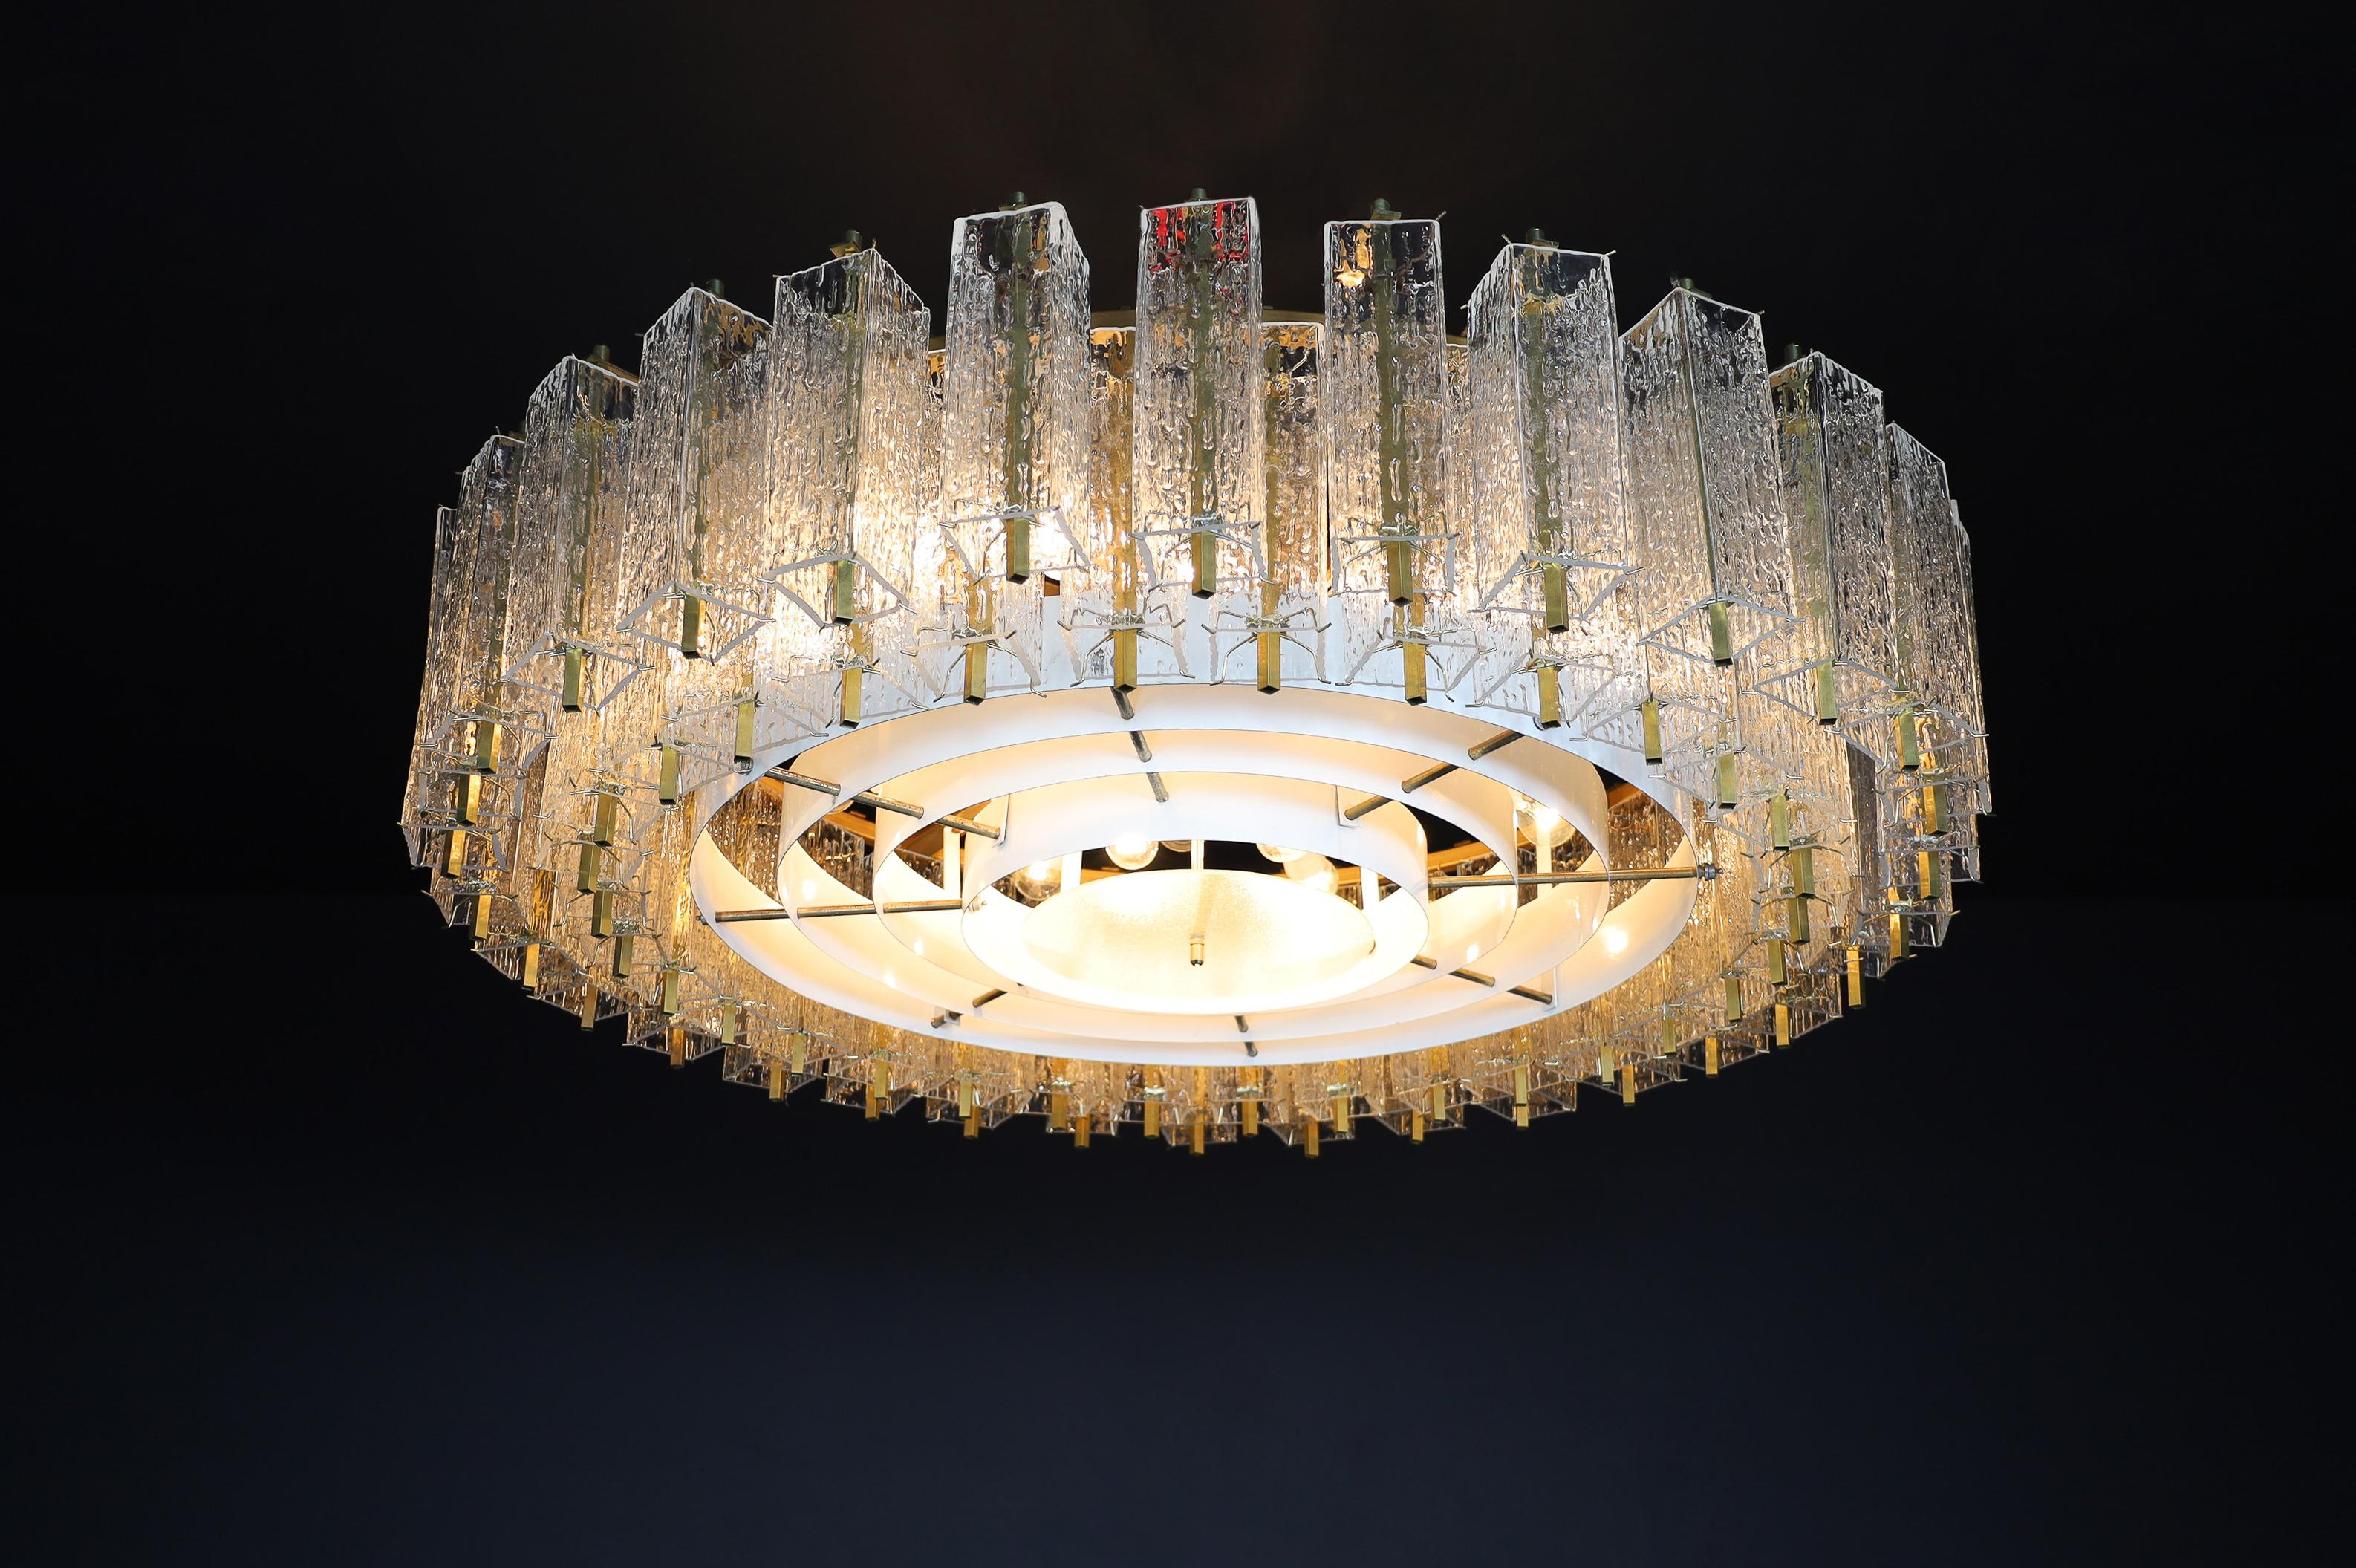 Large Midcentury Chandelier in Structured Glass and Brass, Europe 1960s For Sale 9